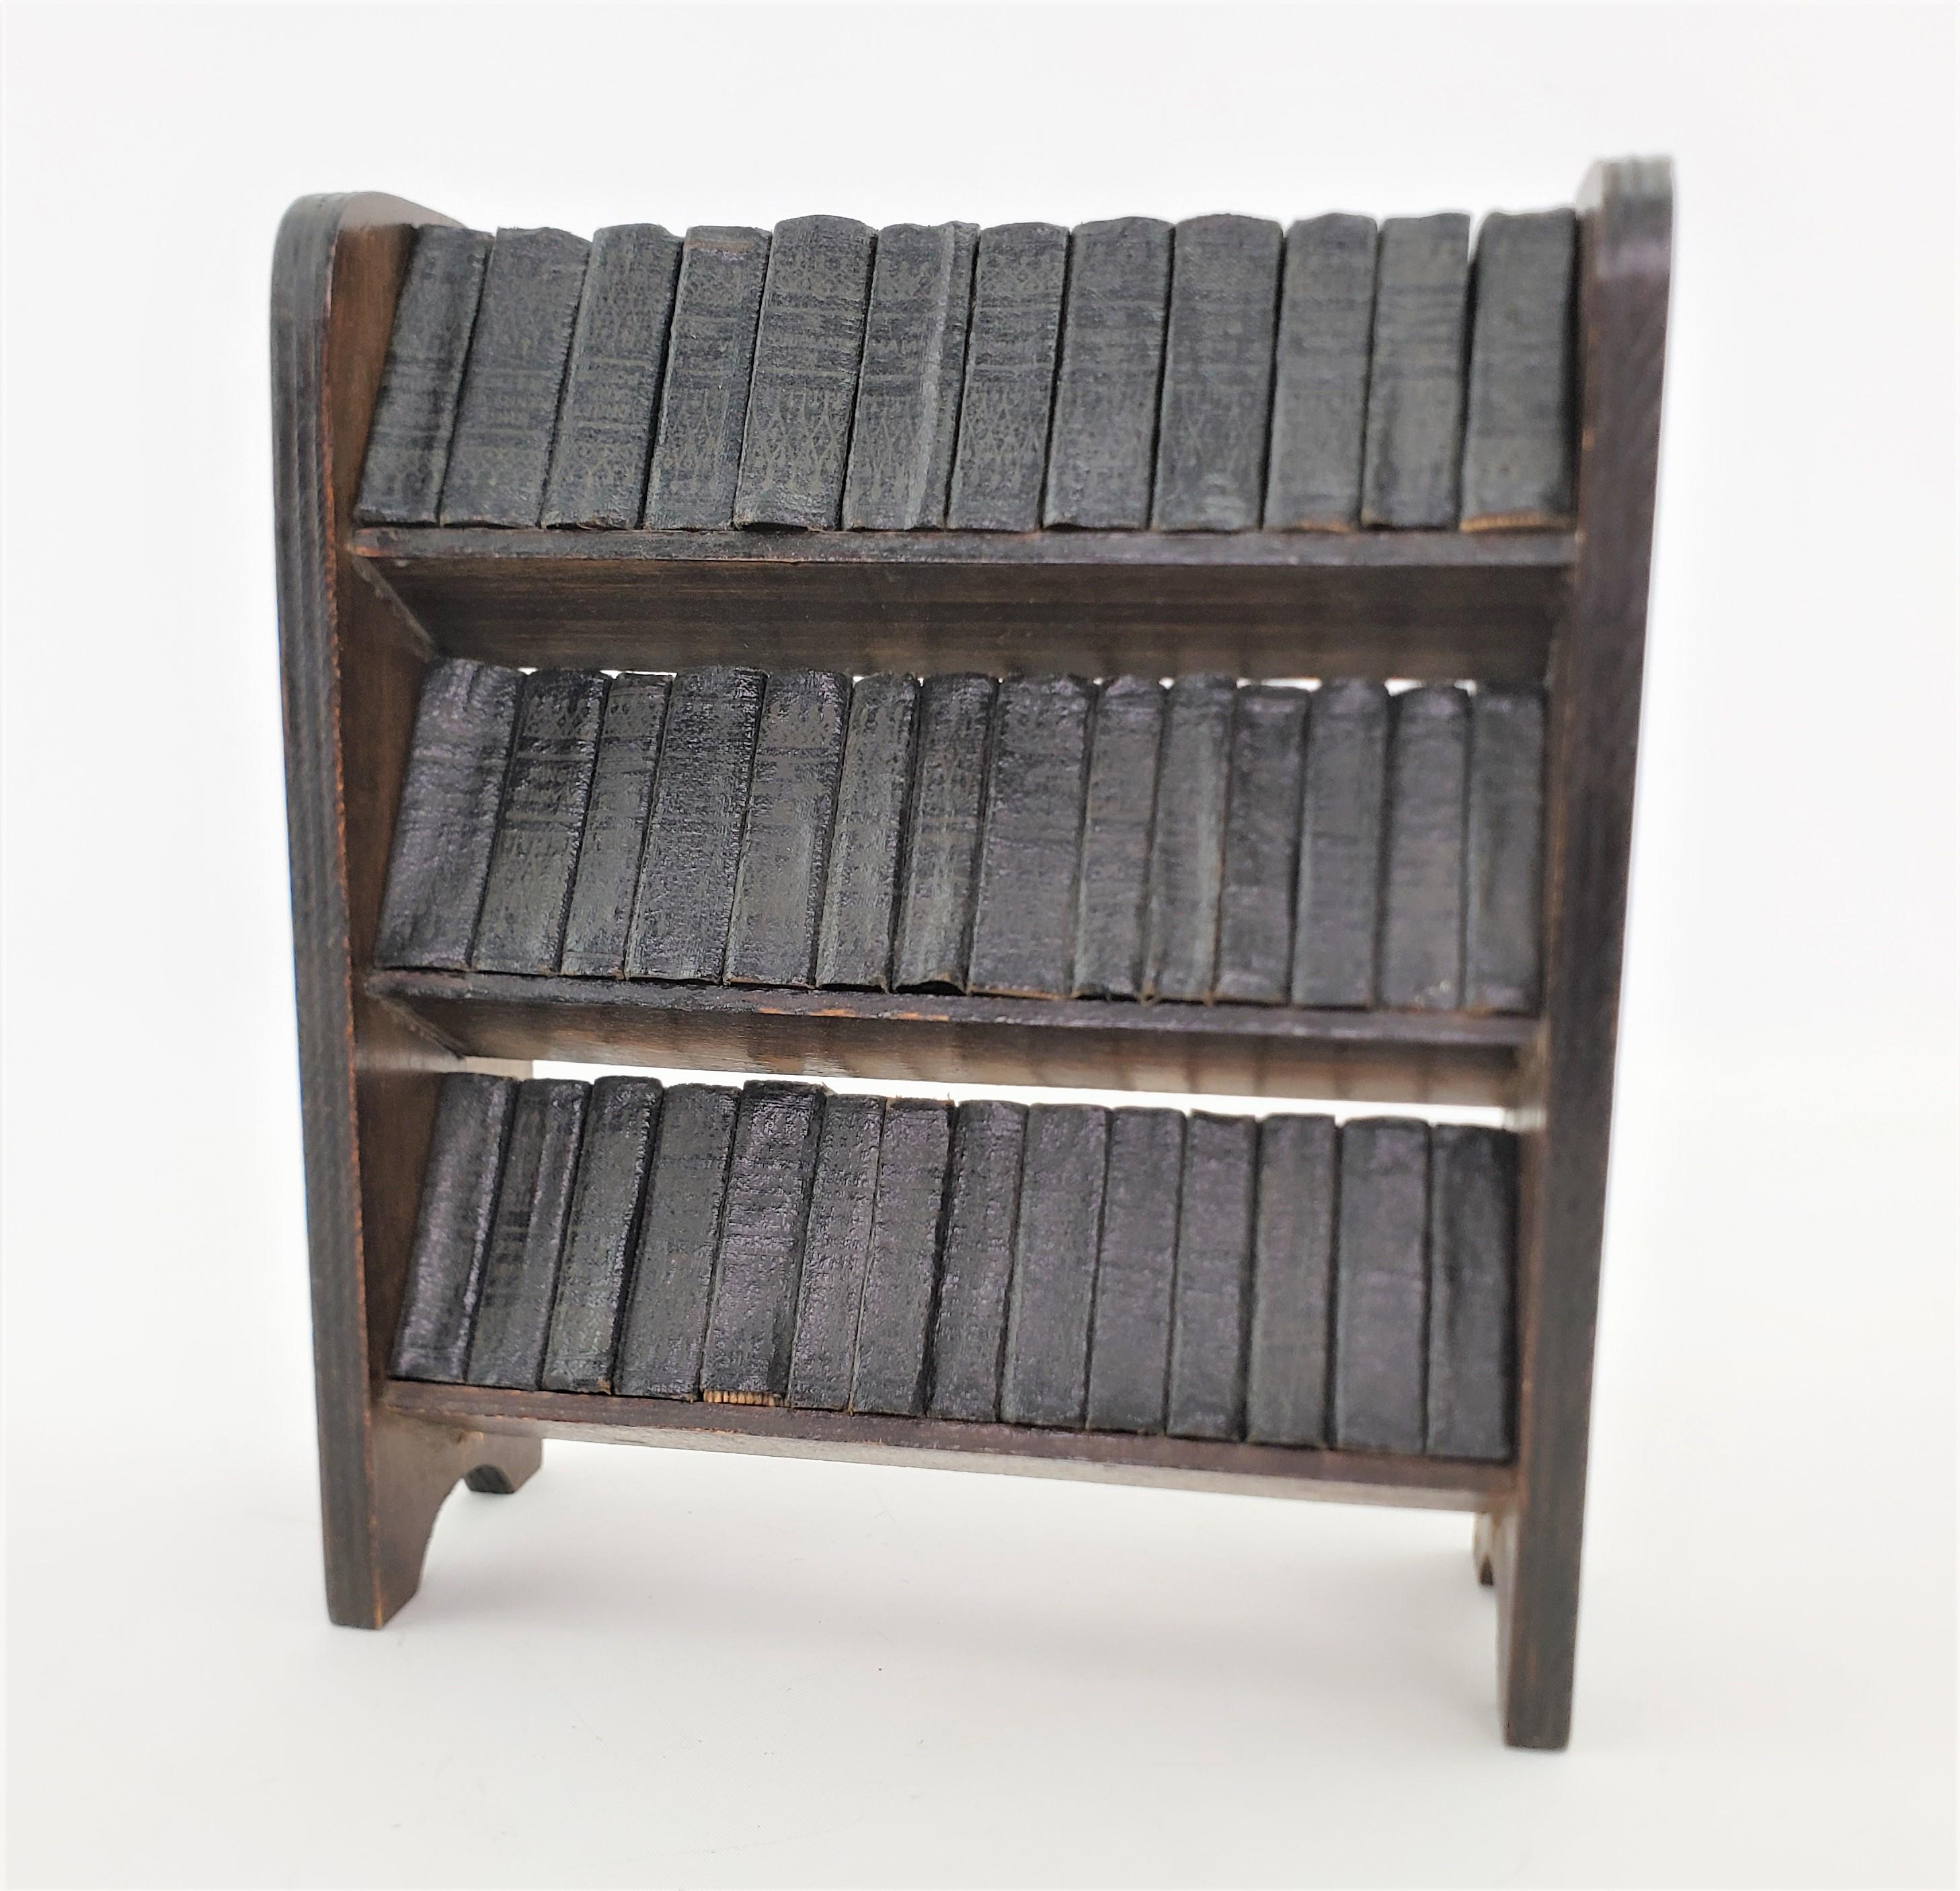 Set of 40 Leather Bound Mini Books of William Shakespeare's Plays with Bookcase 2